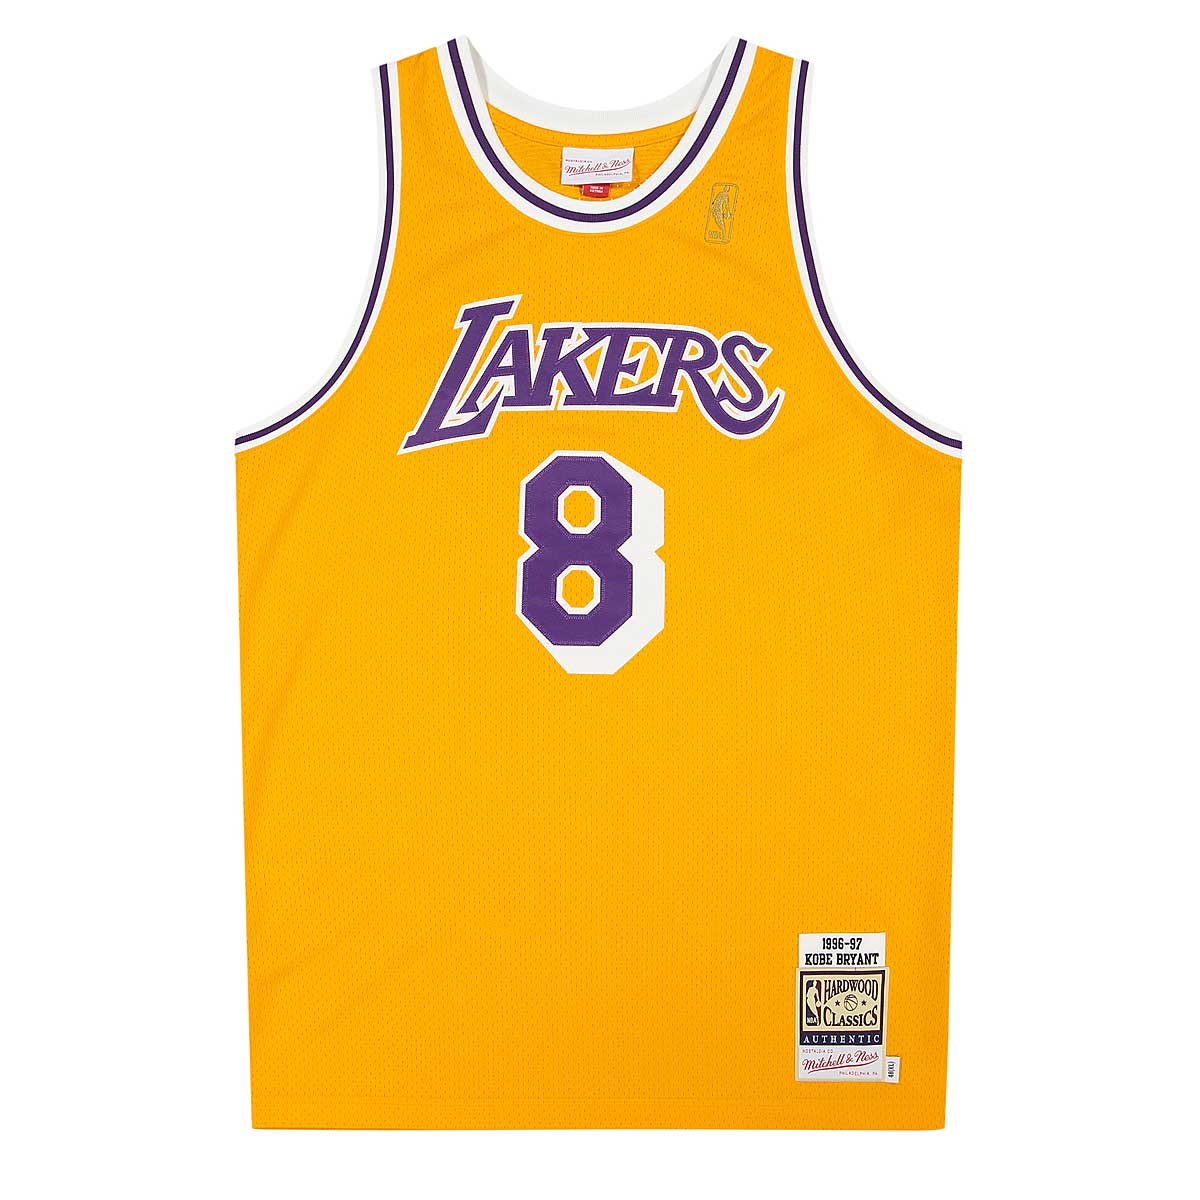 1996-97 Kobe Bryant Authentic Los Angeles Lakers Rookie Home Jersey